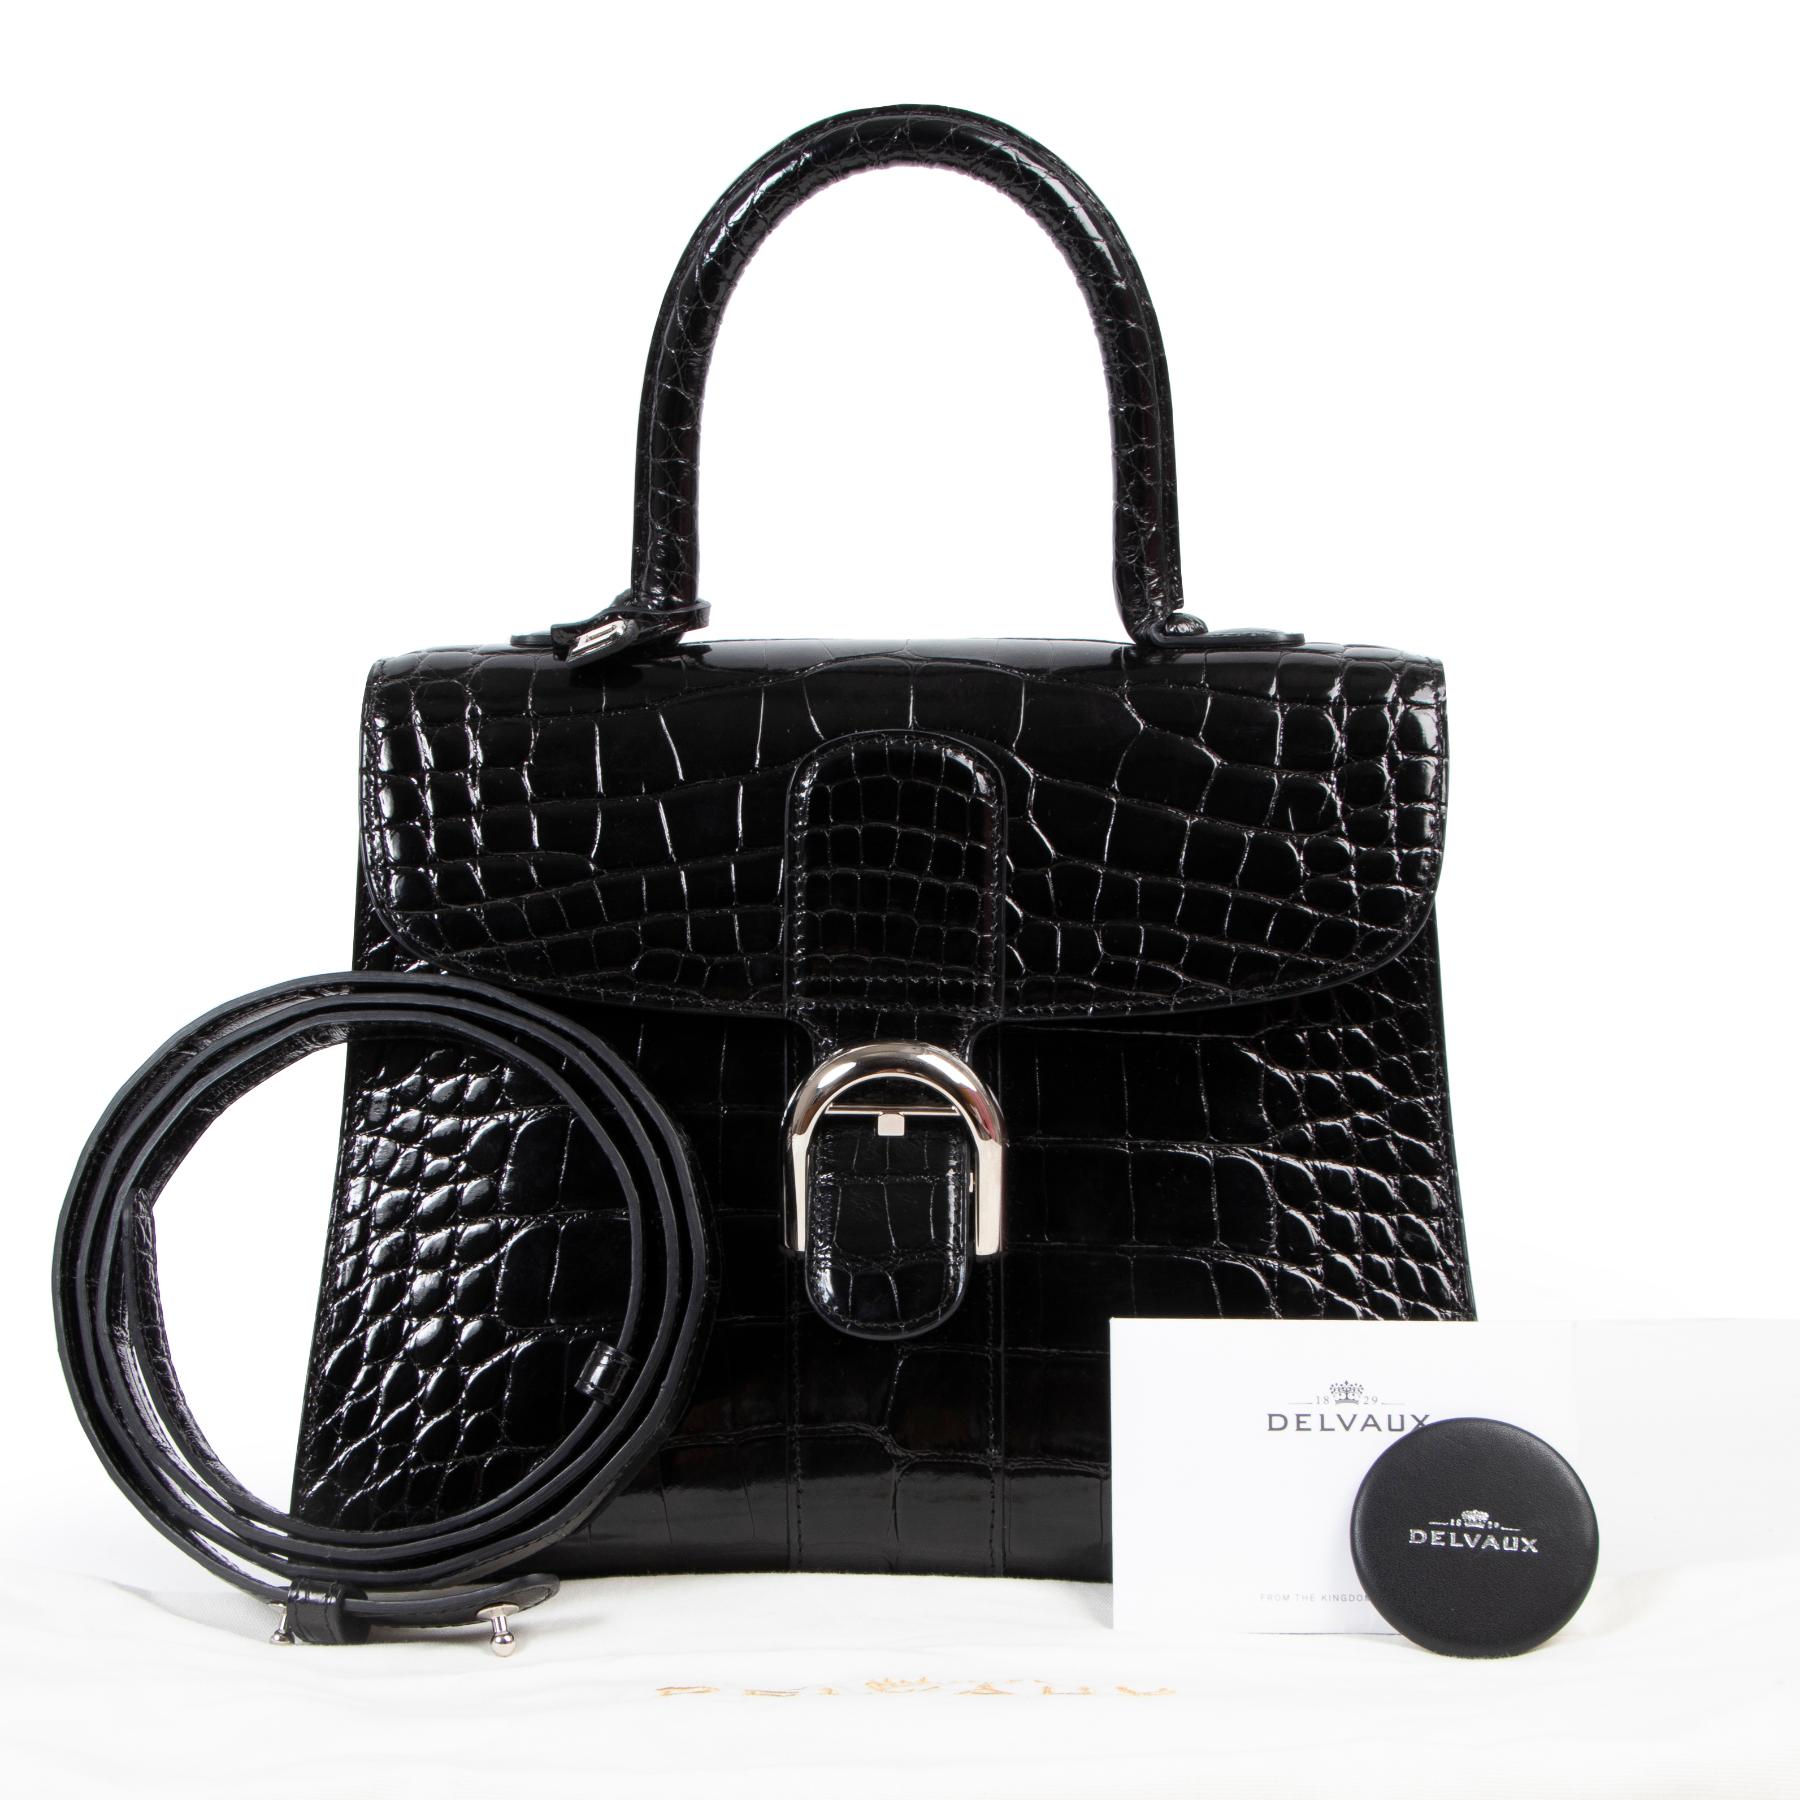 BRAND NEW - exotic!

Delvaux Black Alligator Brillant MM

Wowza! This ah-mazing Delvaux Black Alligator Brillant MM will take your breath away with its beauty.

Crafted out of 100% alligator skin, this shiny alligator bag is beautiful and